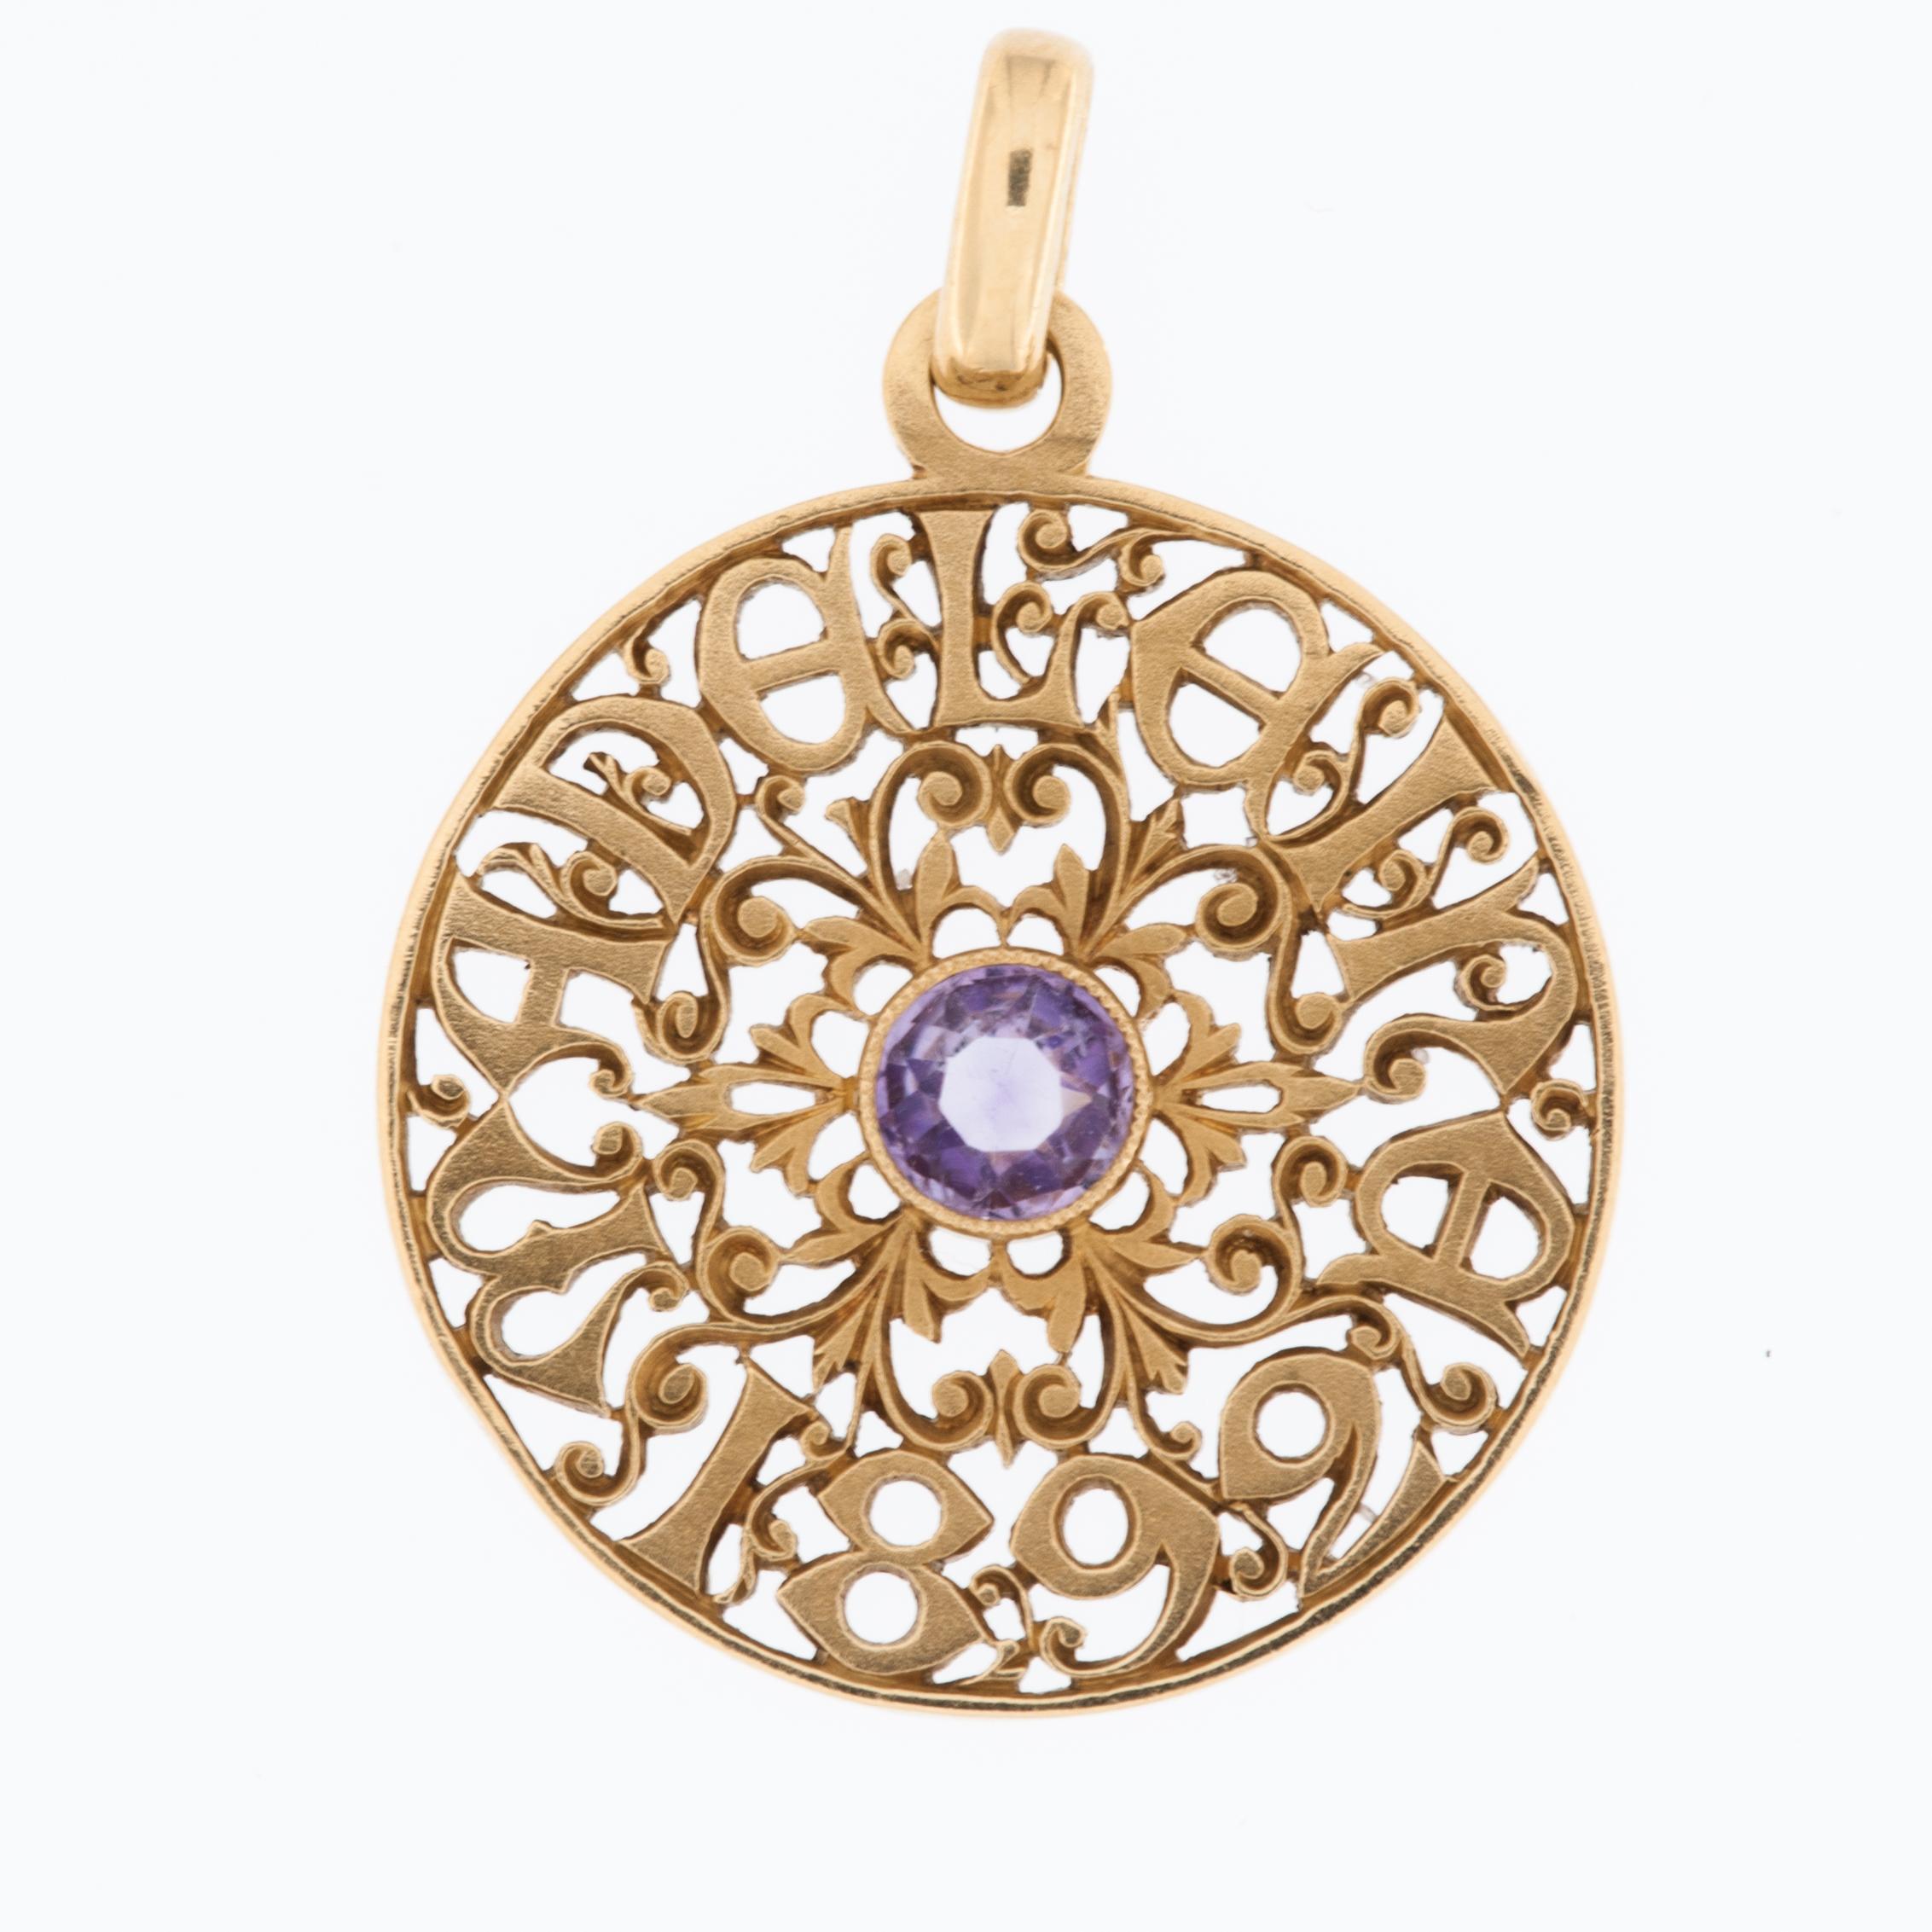 The Belle Époque 18kt Yellow Gold Pendant with Amethyst is a stunning piece of Victorian-style jewelry that exudes elegance and timeless charm. The pendant features a rich, warm 18kt yellow gold setting that adds a touch of luxury to the design.

At